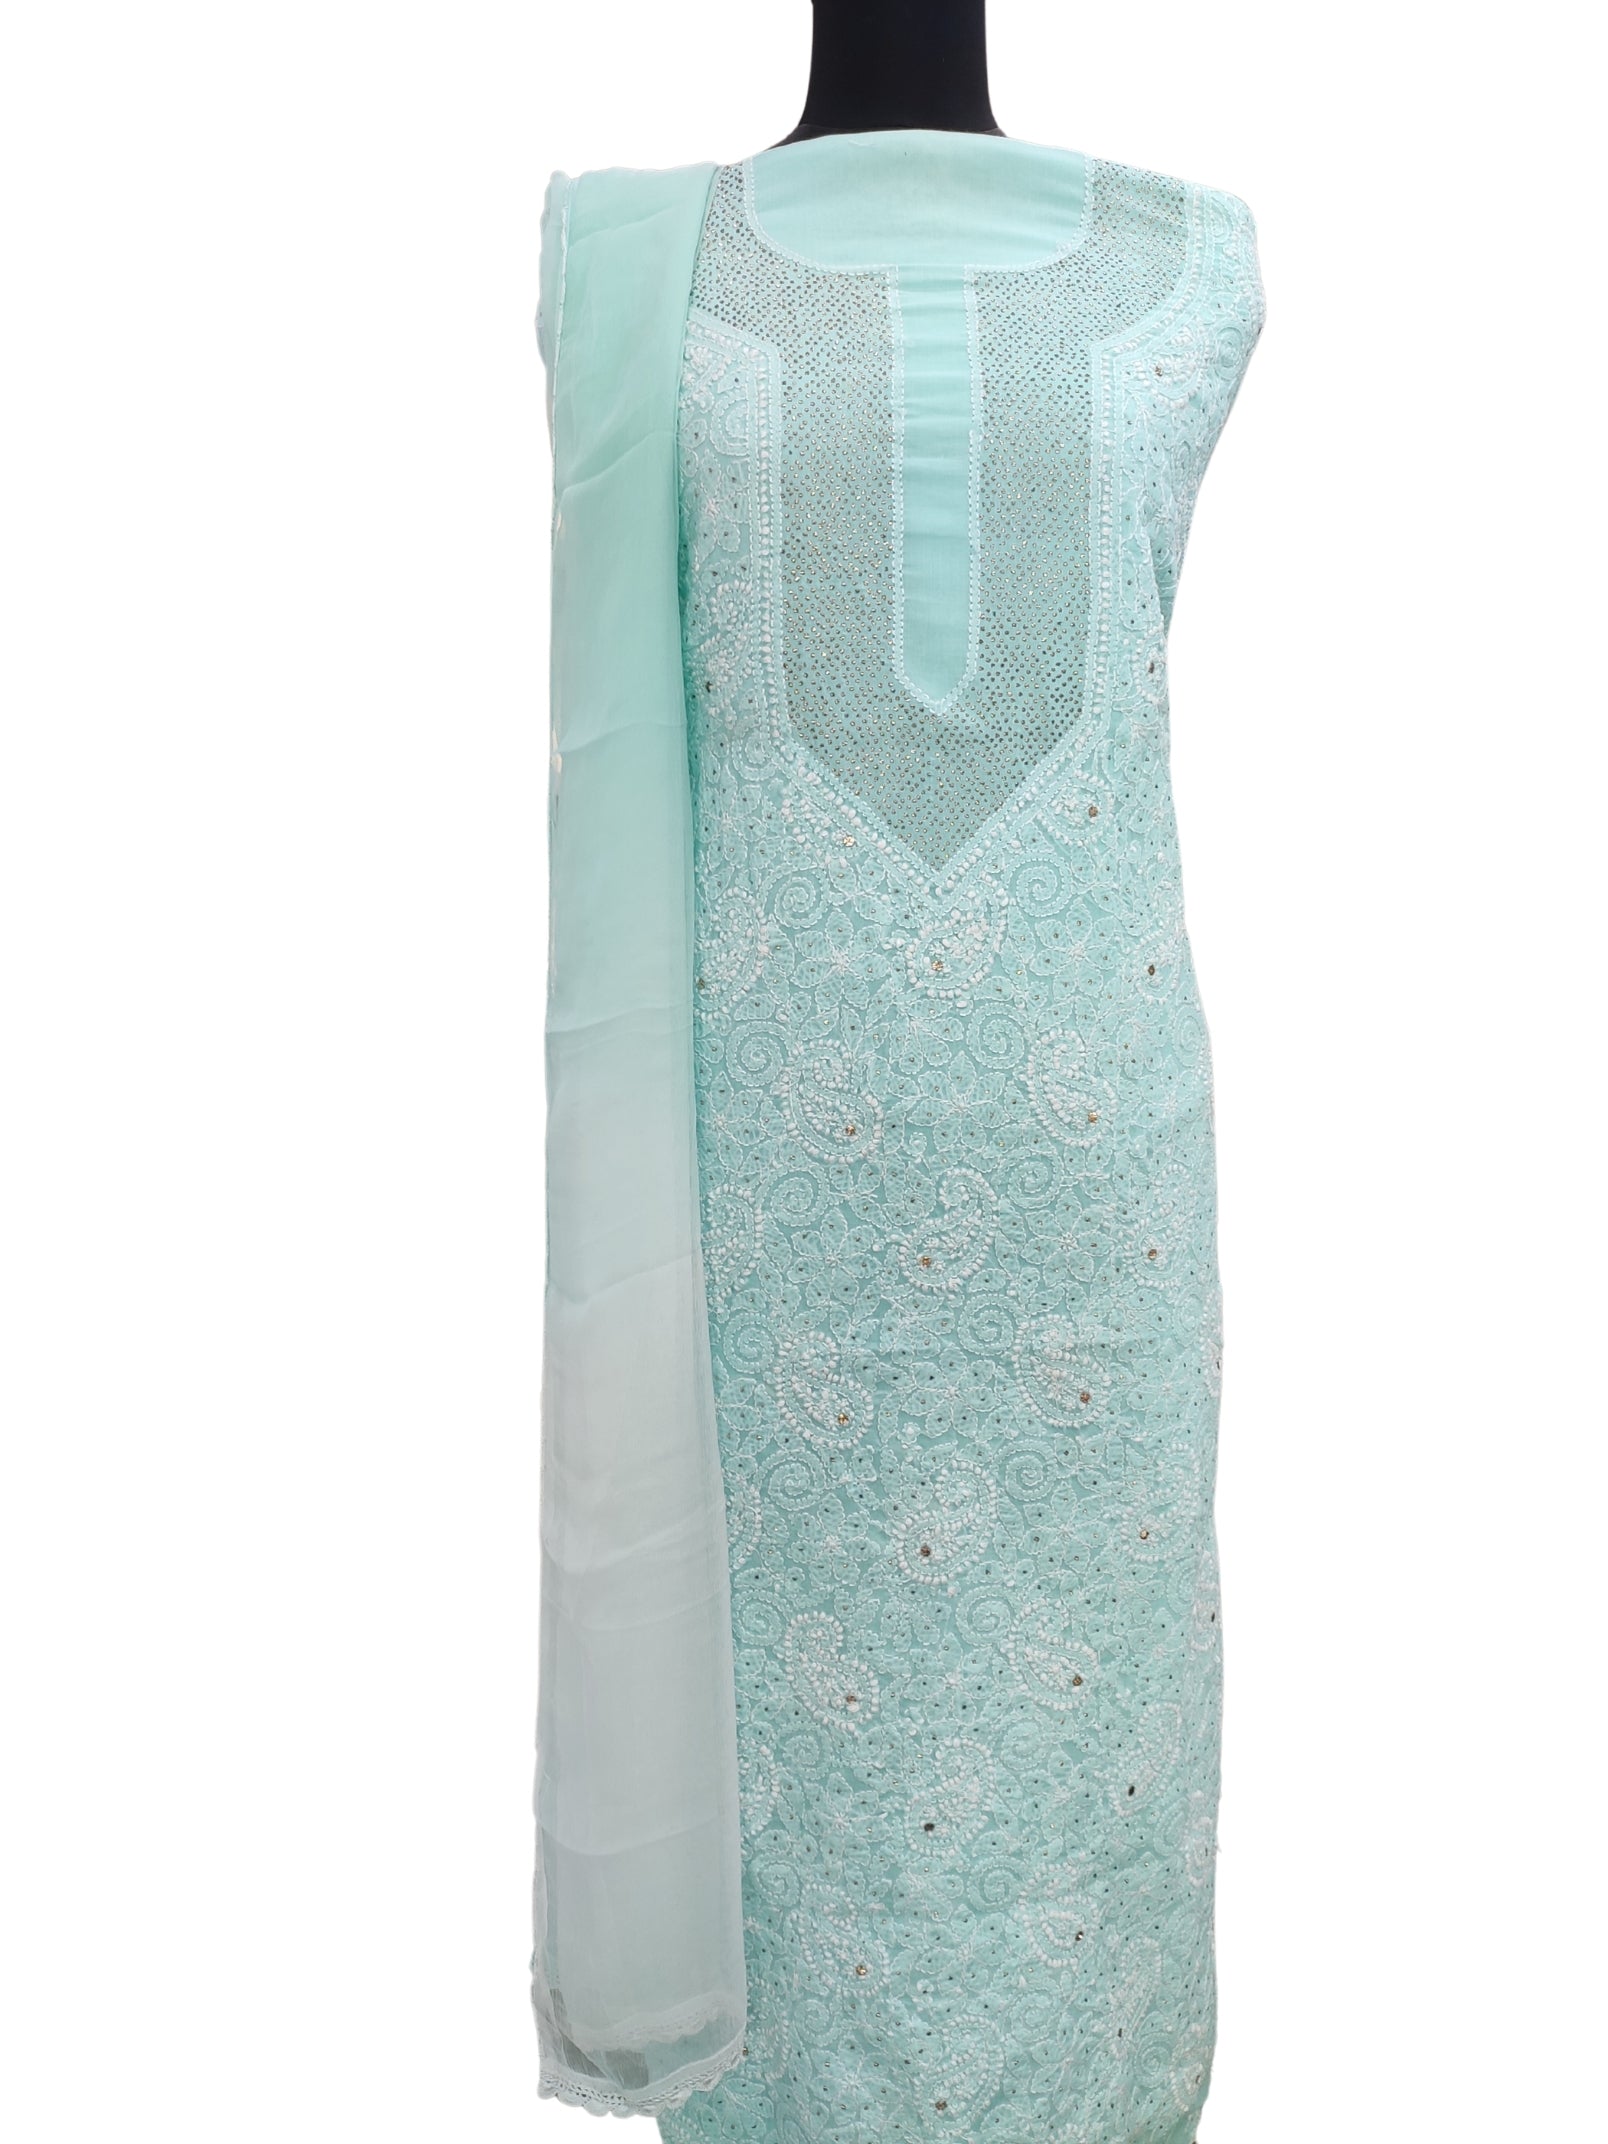 Shyamal Chikan Hand Embroidered Sea Green Cotton Lucknowi Chikankari Unstitched Suit Piece With Mukaish Work - S12199